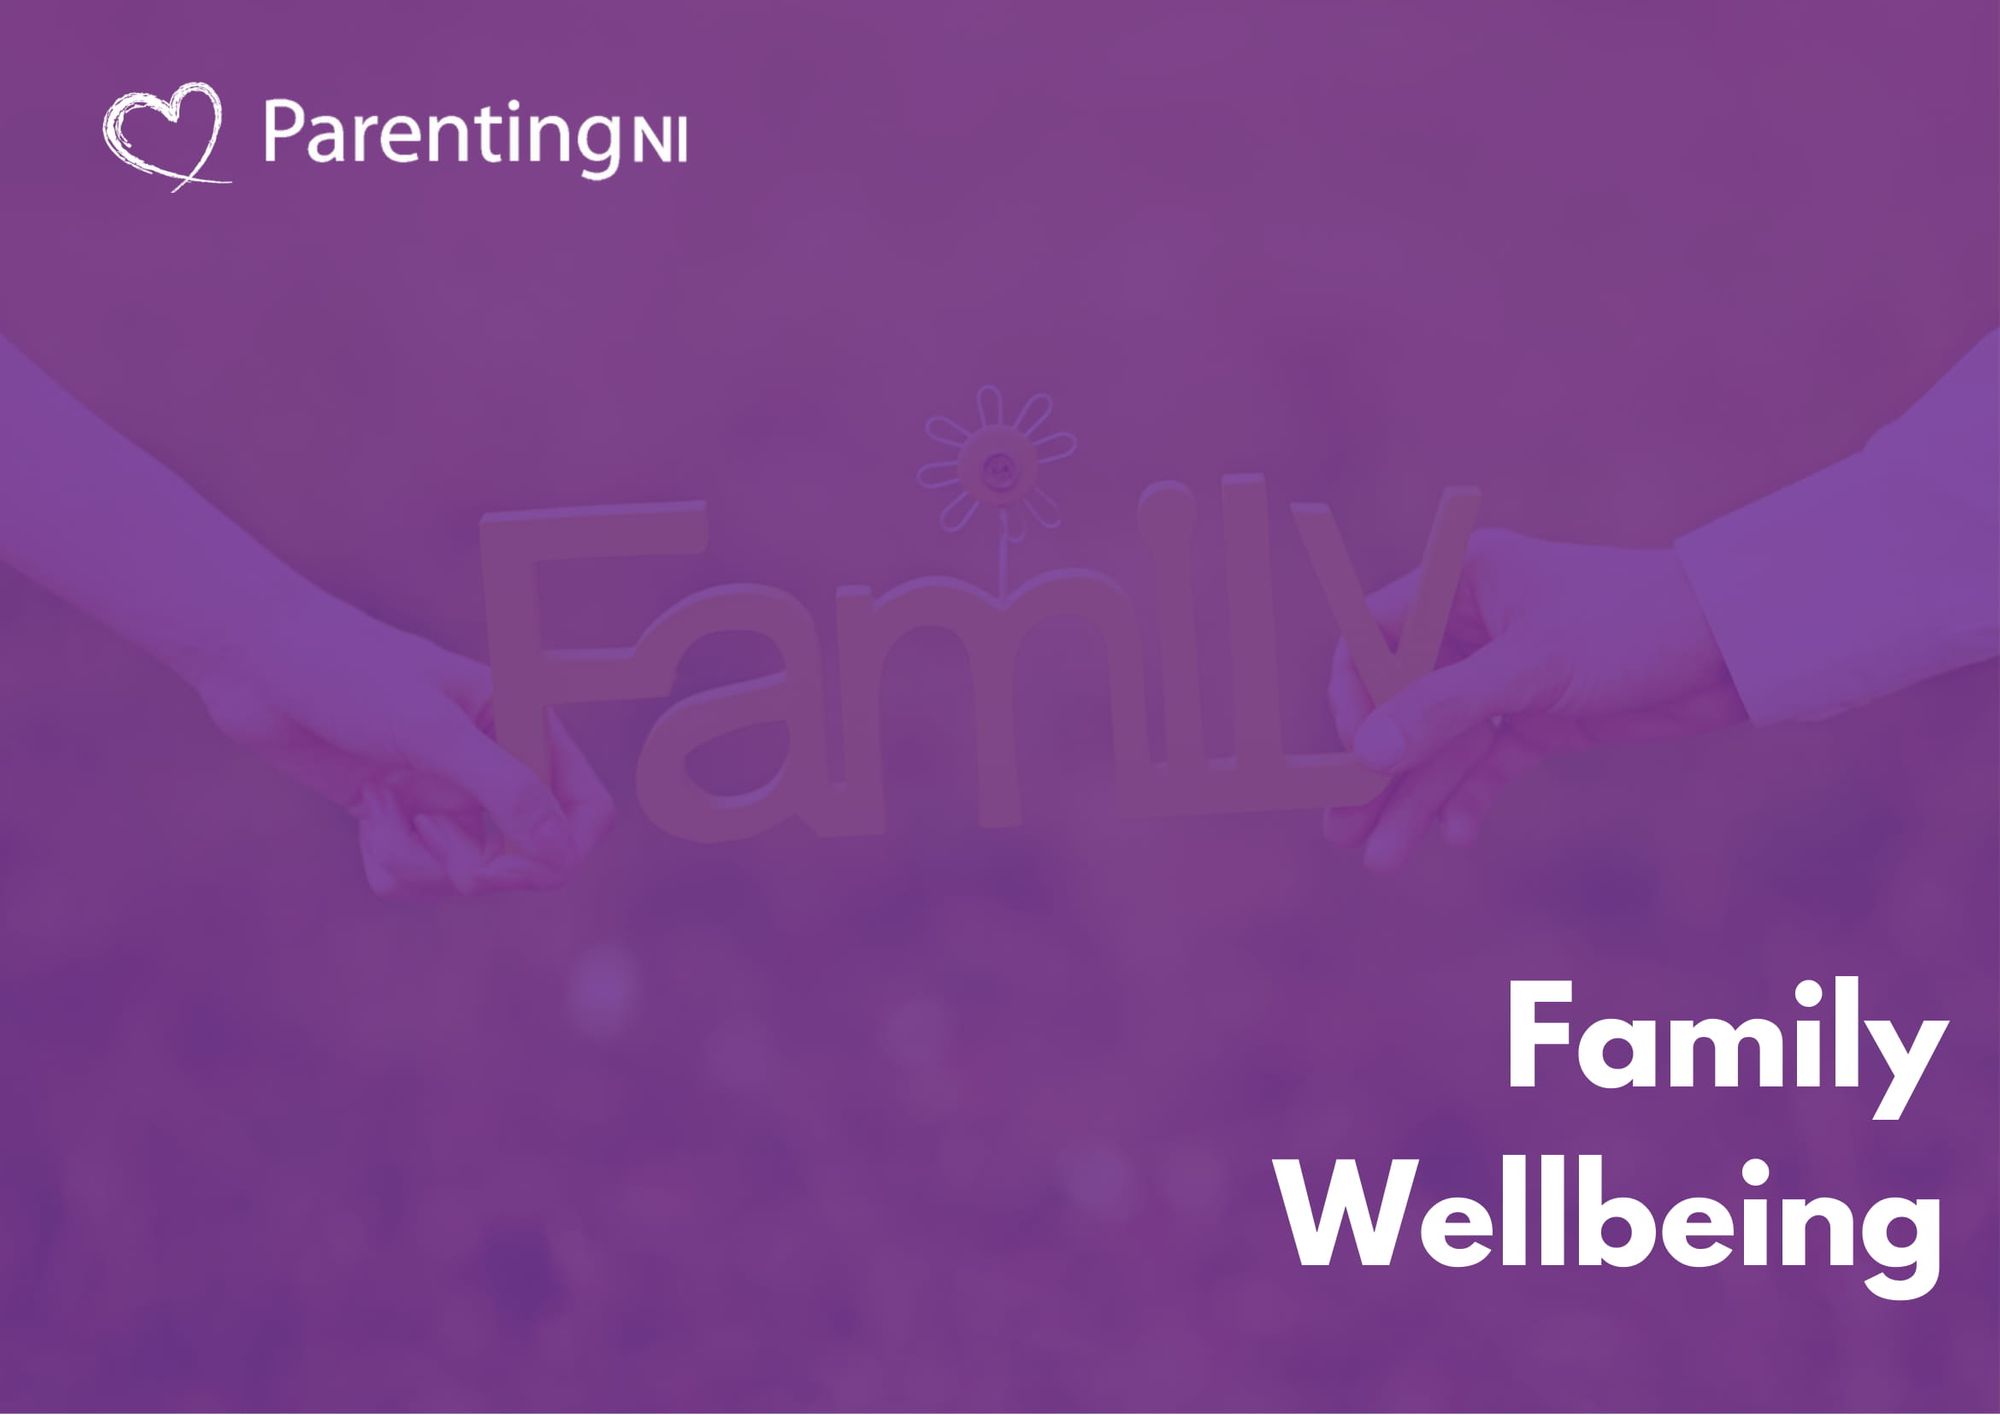 ParentingNI - Family Wellbeing